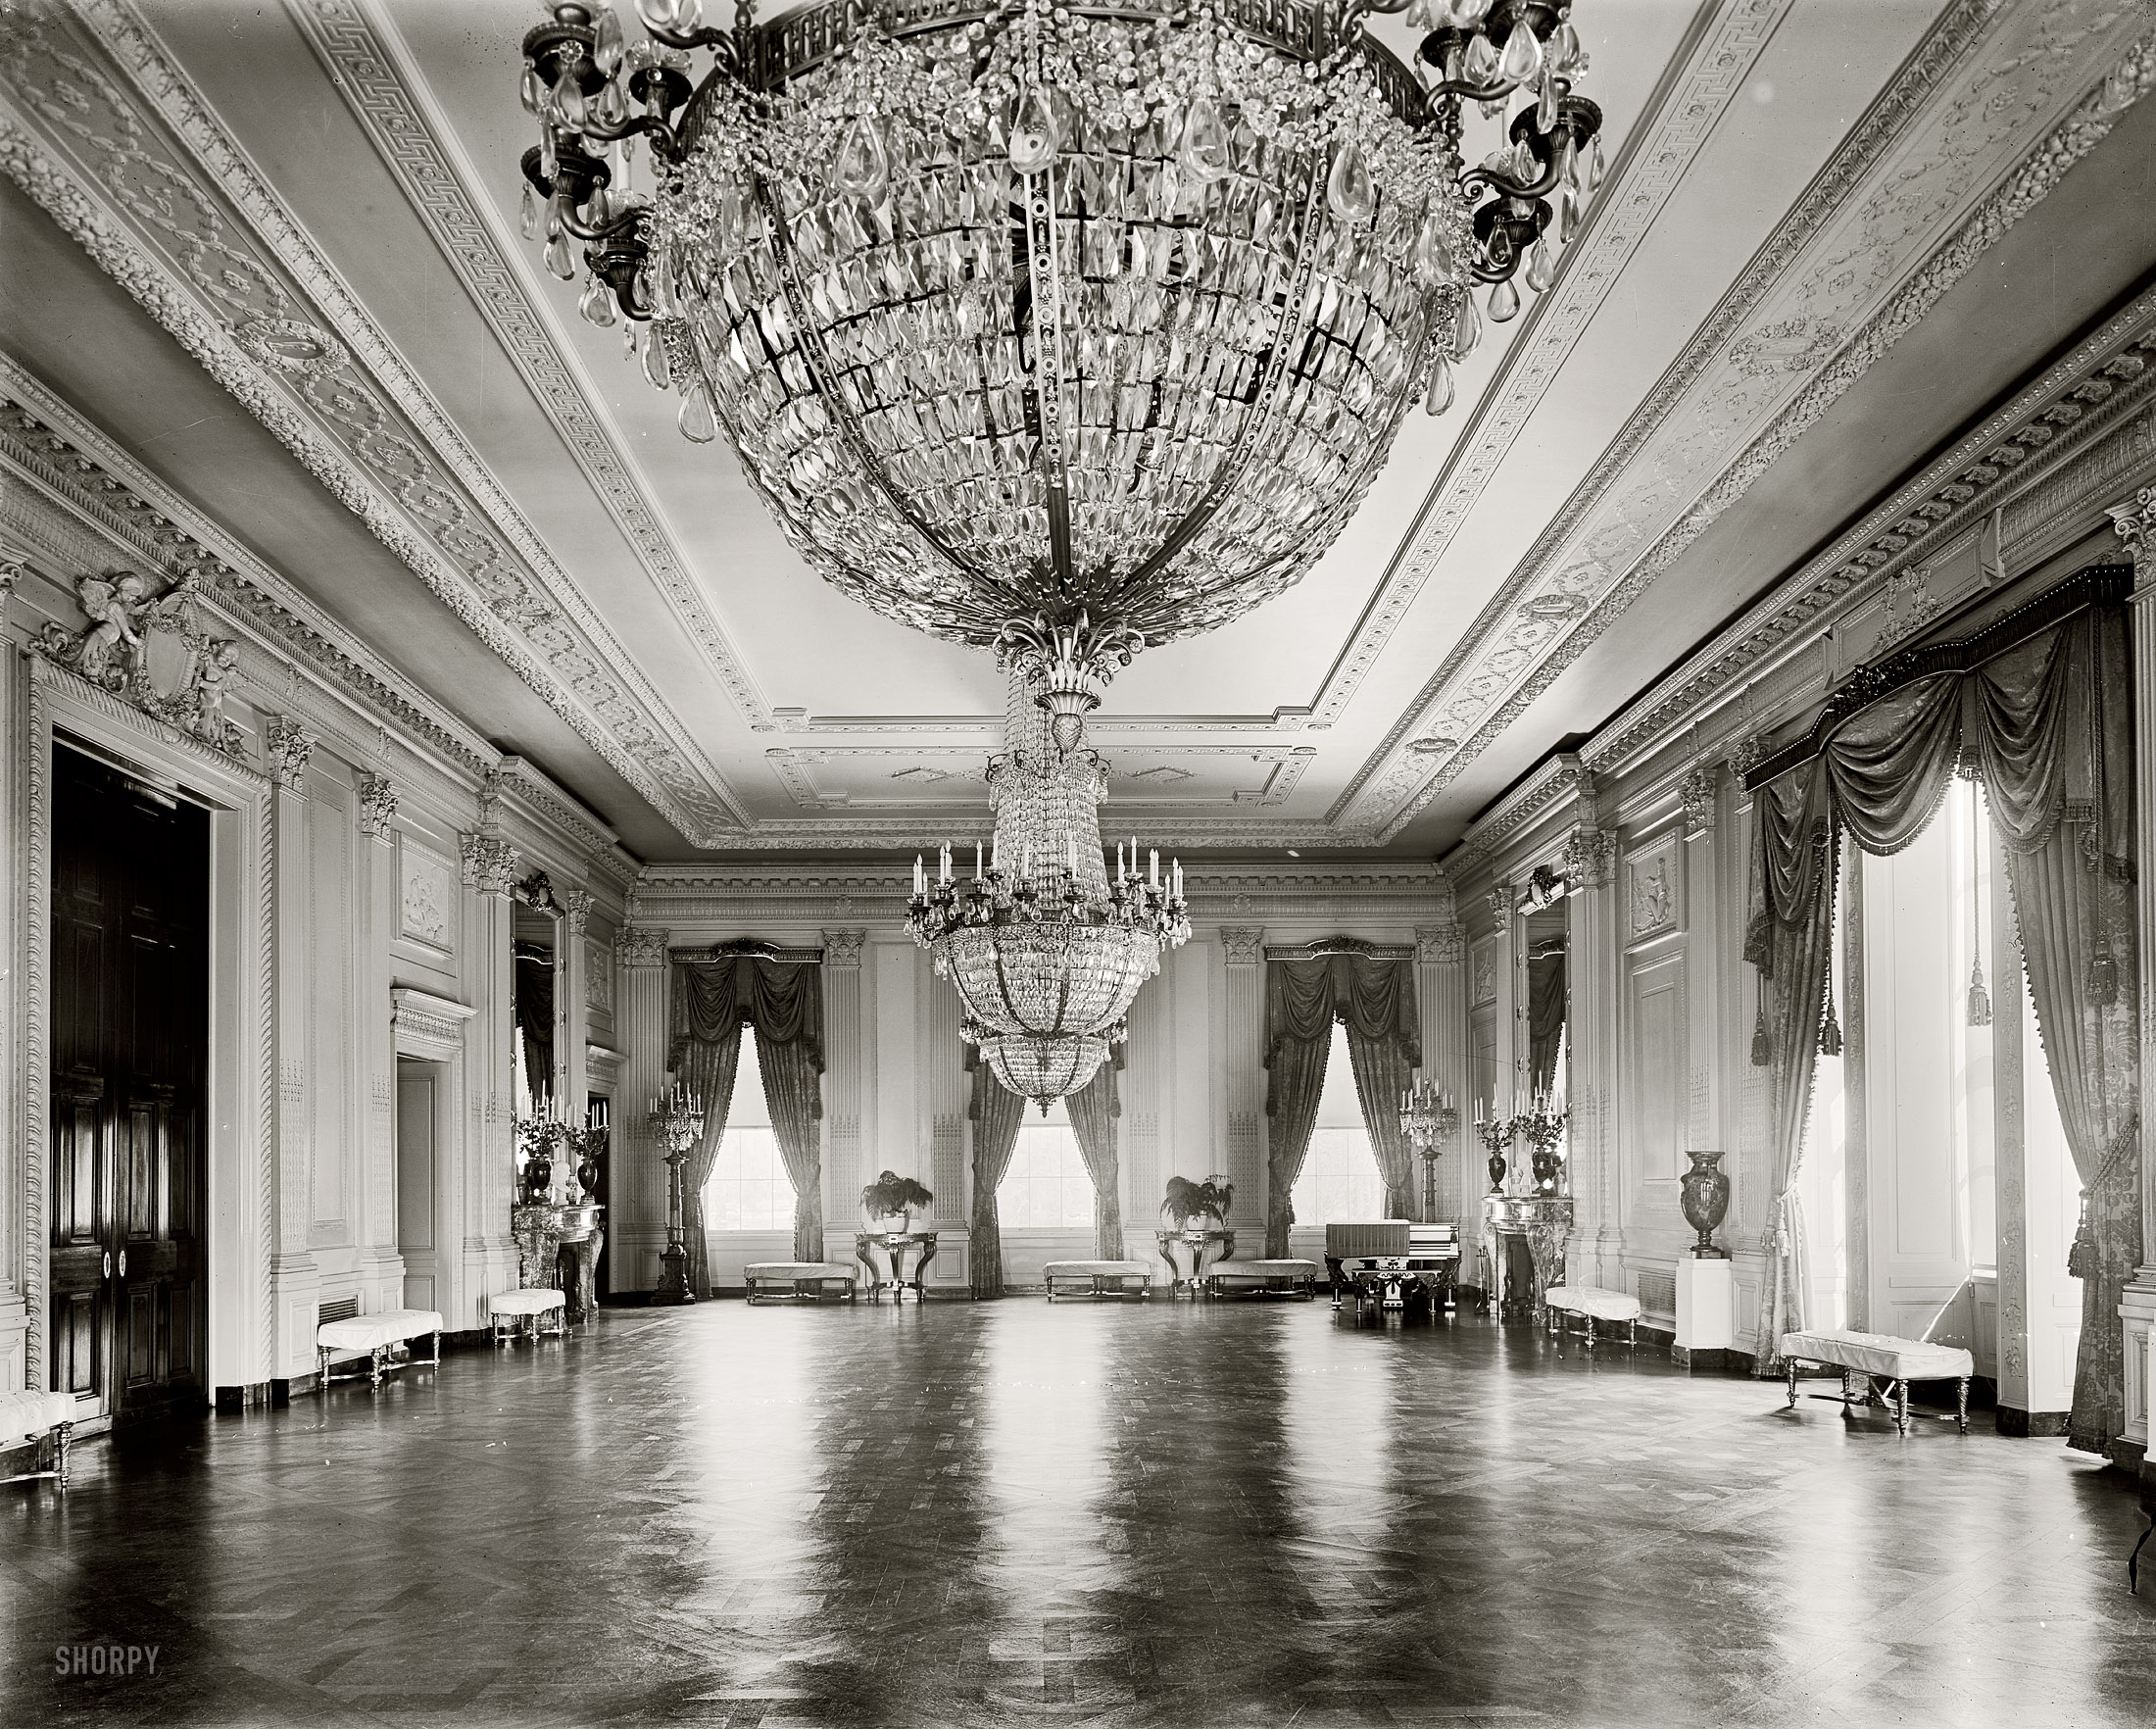 The East Room of the White House circa 1910. So, where'd we put that feather duster? Harris & Ewing Collection glass negative, 8x10 inches. View full size.